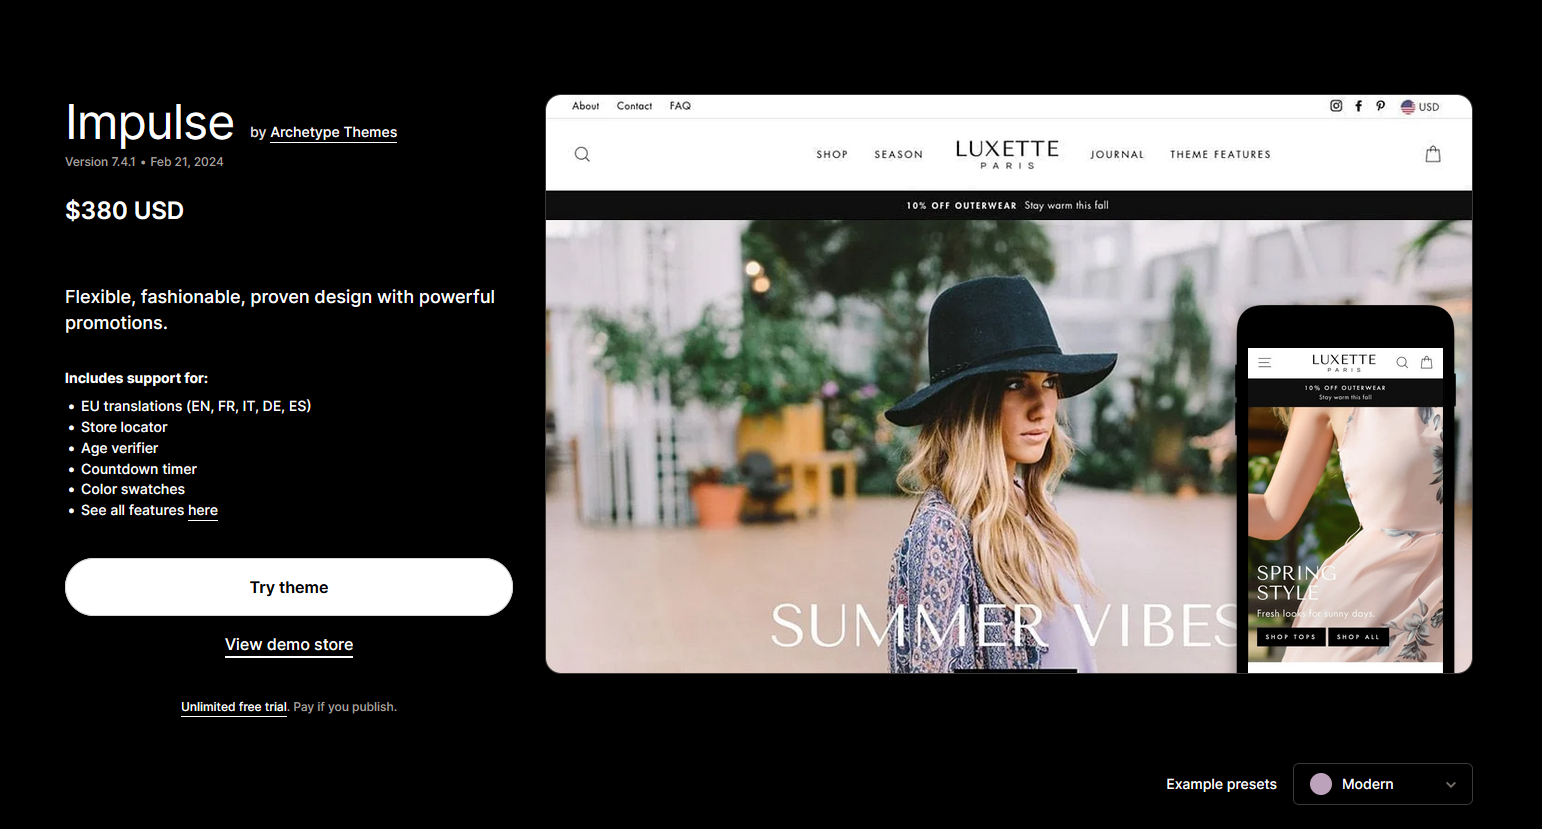 Impluse theme in Shopify